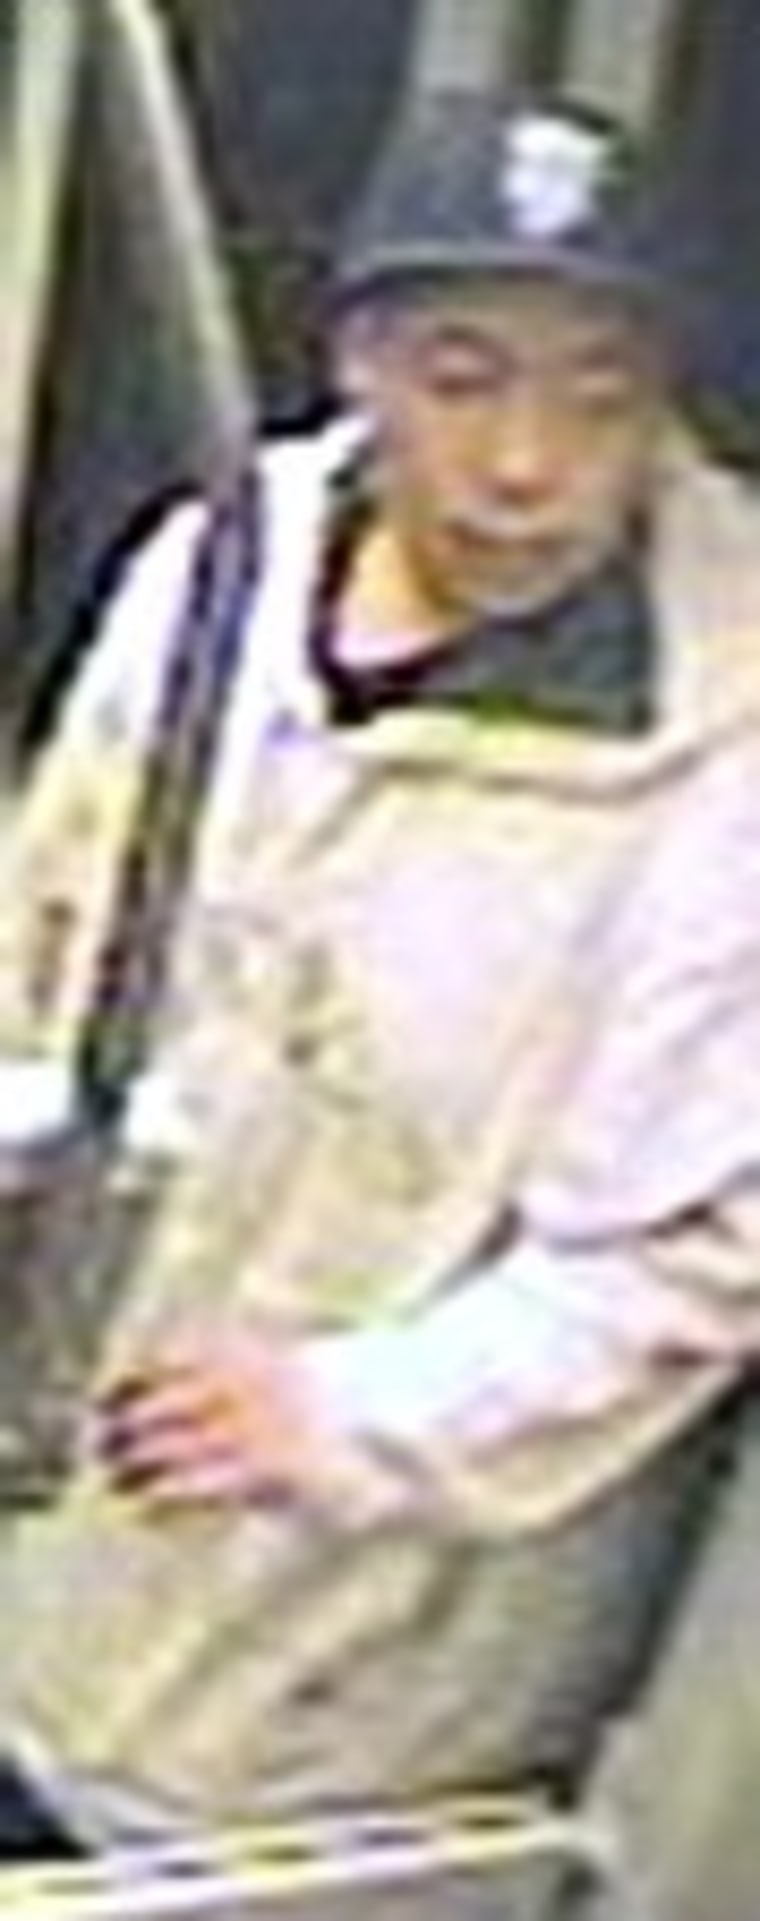 This Sept. 23 image taken from a surveillance video and provided by the San Francisco Police Department show suspect Nikhom Thephakaysone on a MUNI train in San Francisco.